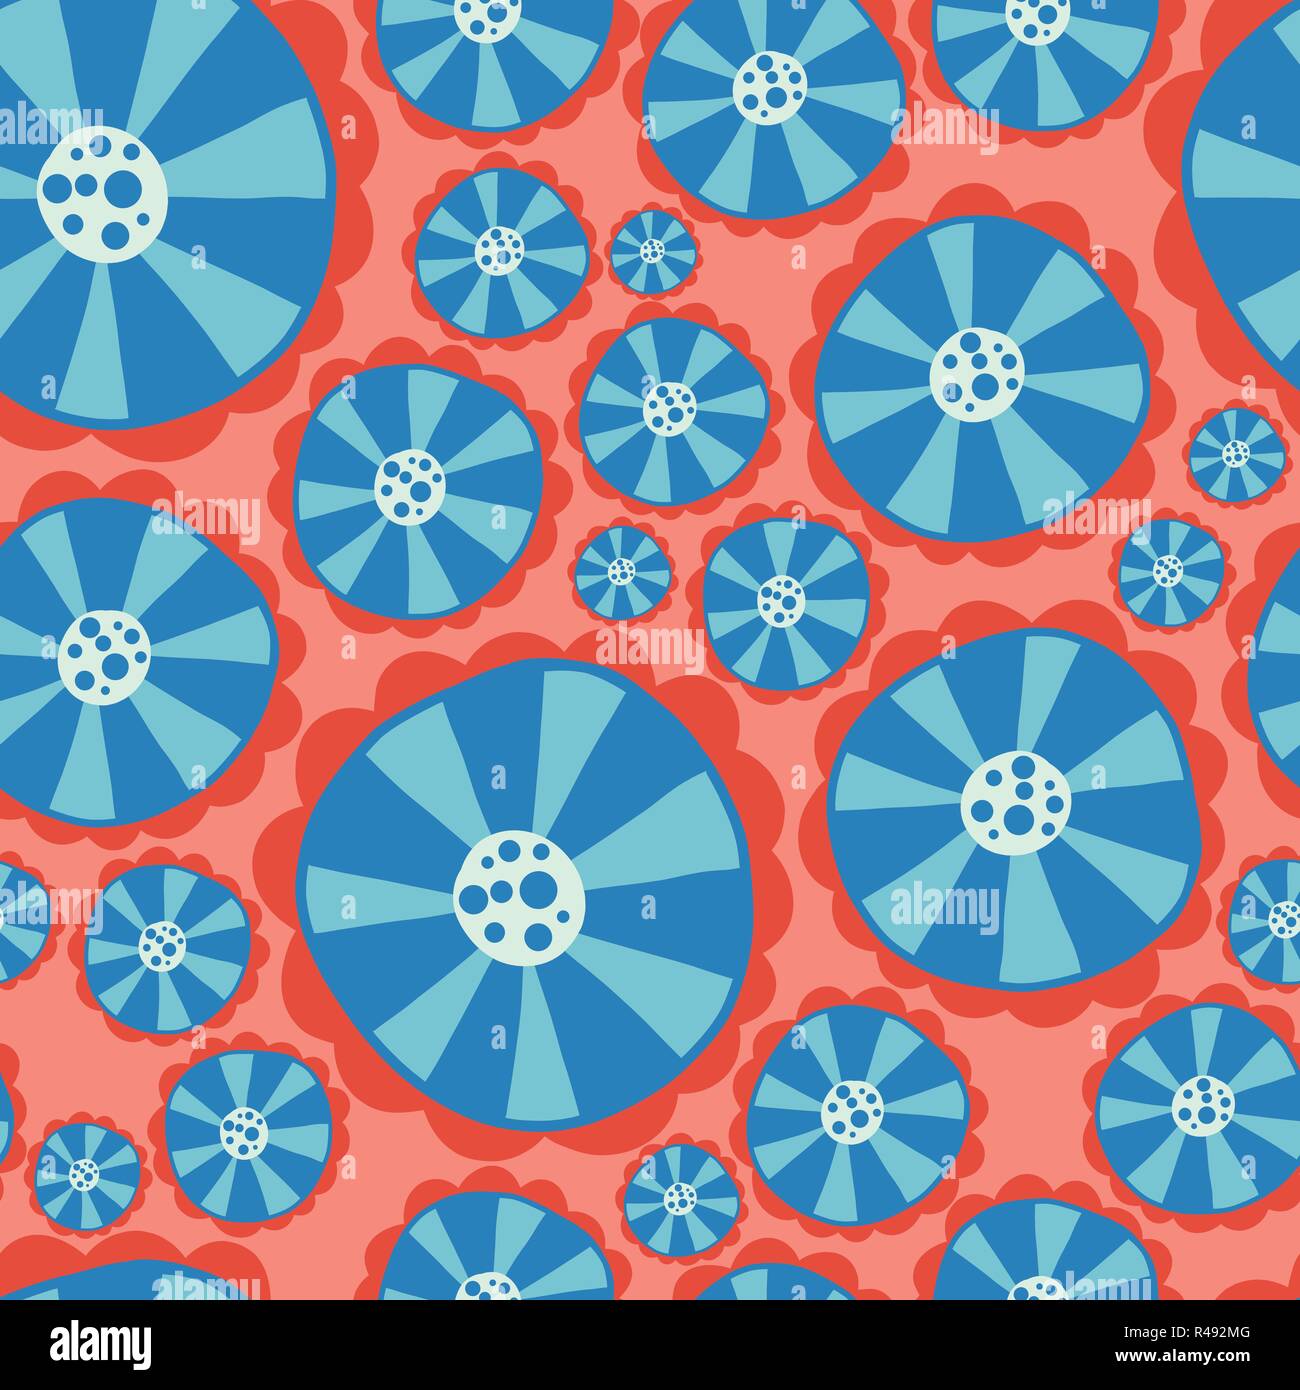 Hippie flowers. Flower power seamless vector background. Blue and red abstract flowers on pink Stock Vector